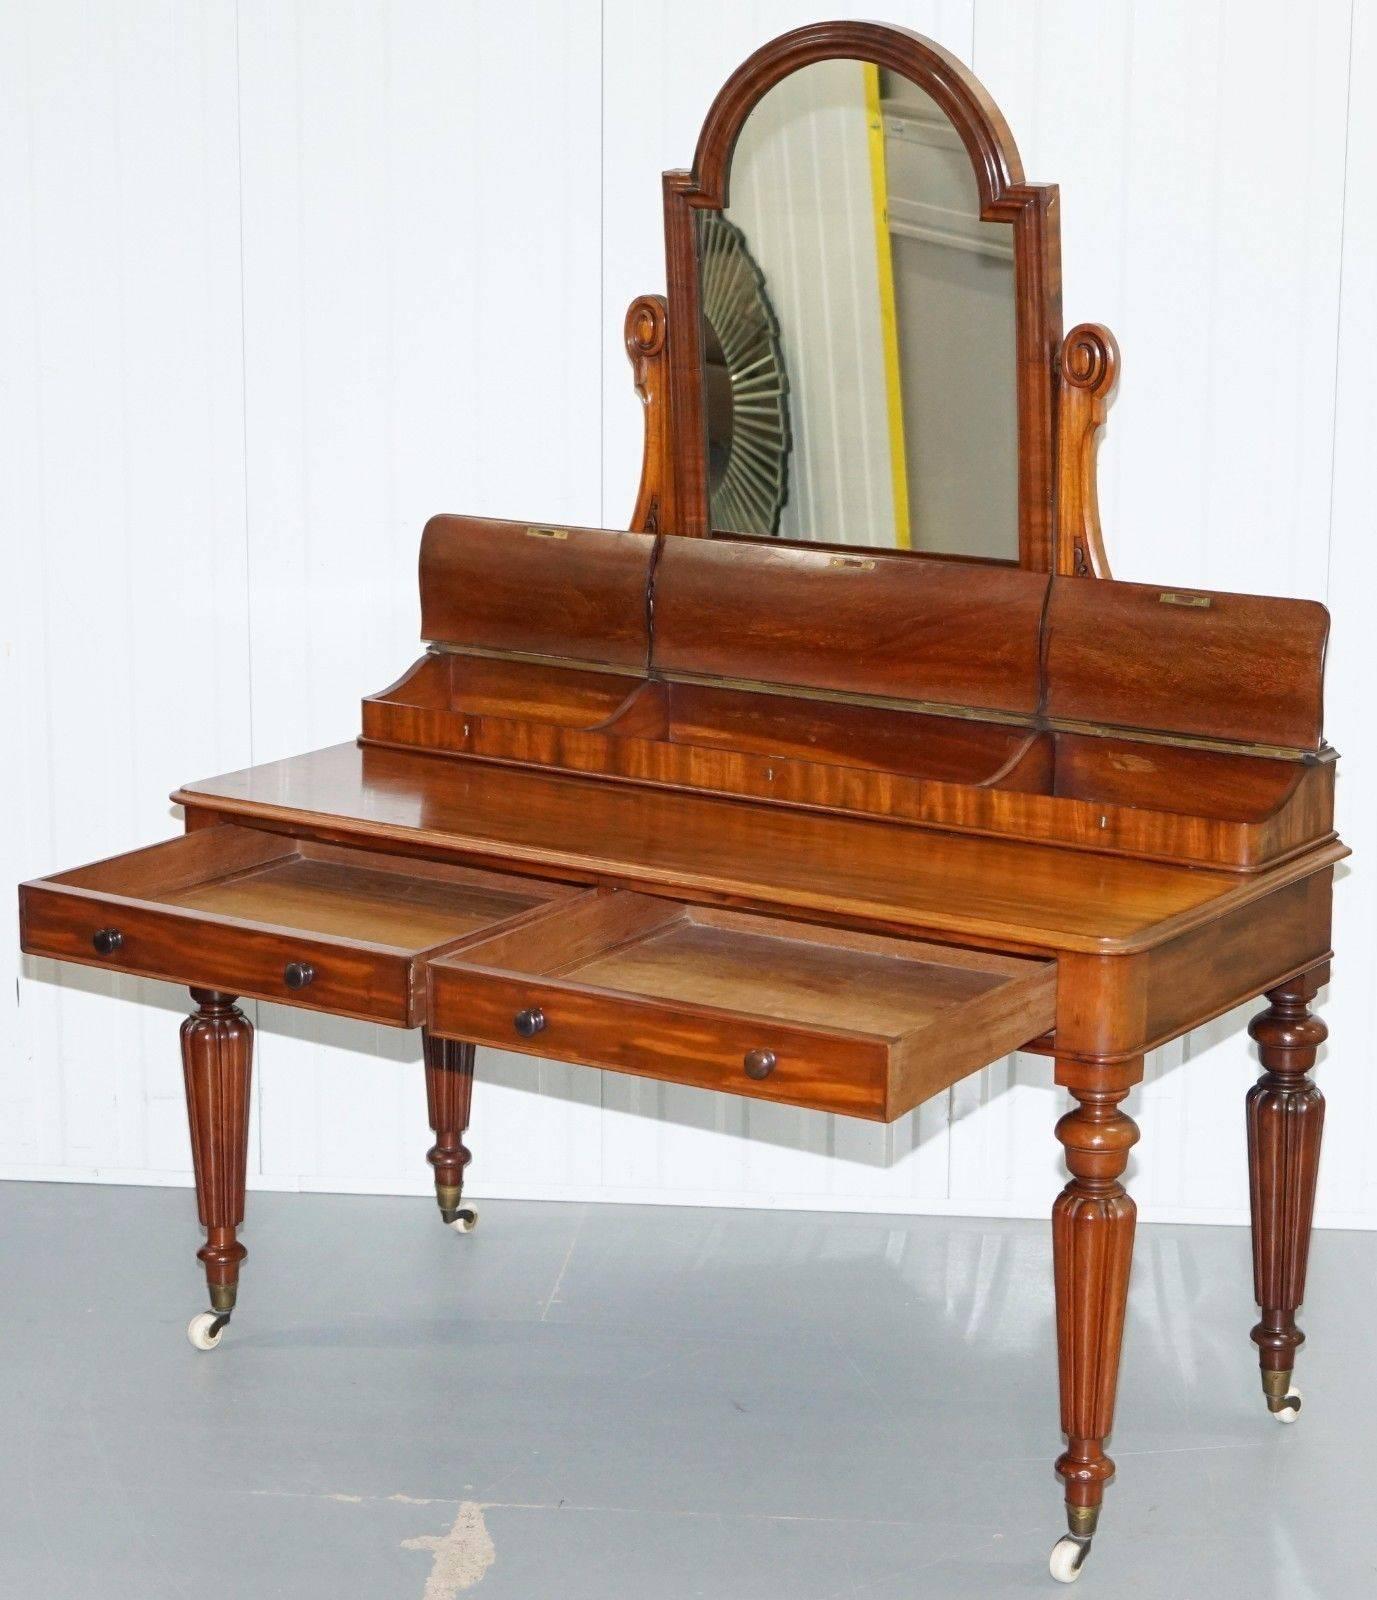 Lovely William IV Mahogany Dressing Table with Gillows Inspired Legs, circa 1830 4